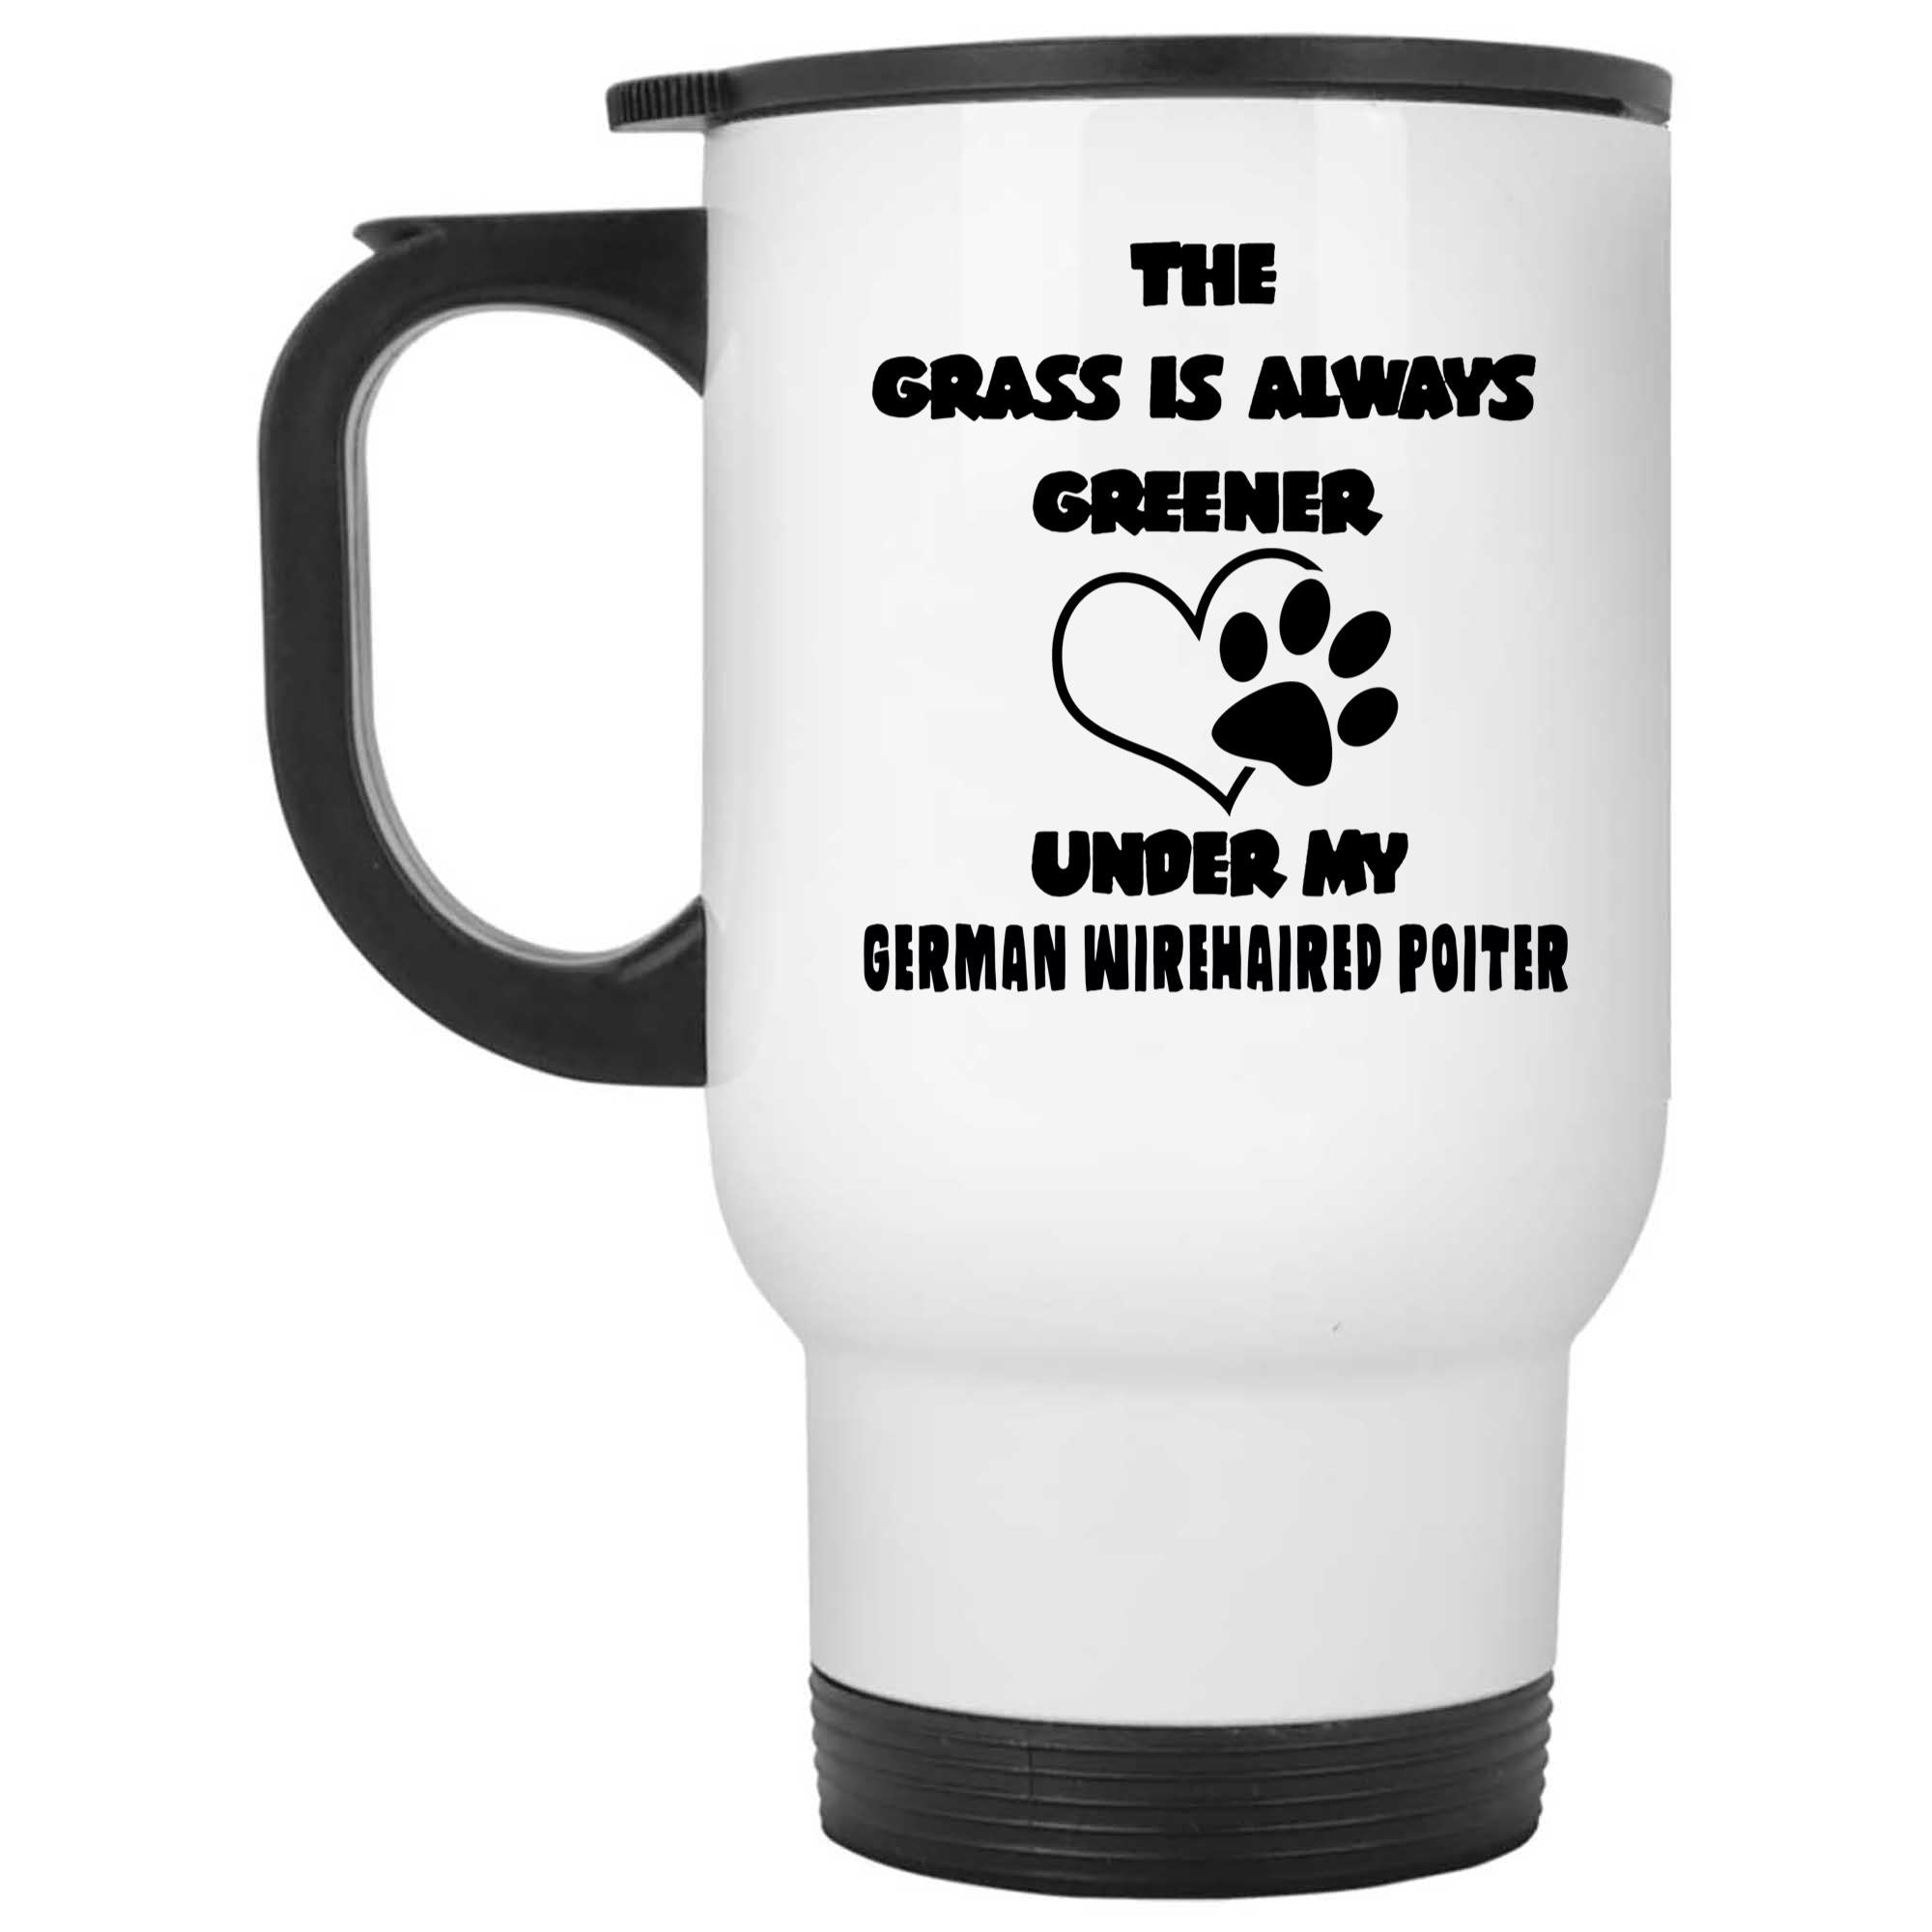 Skitons Funny Ceramic Novelty Coffee Mug The Grass Is Always Greener Under My German Wirehaired Poiter Dog Funny Sarcastic, Dog Lover LX0WXLO